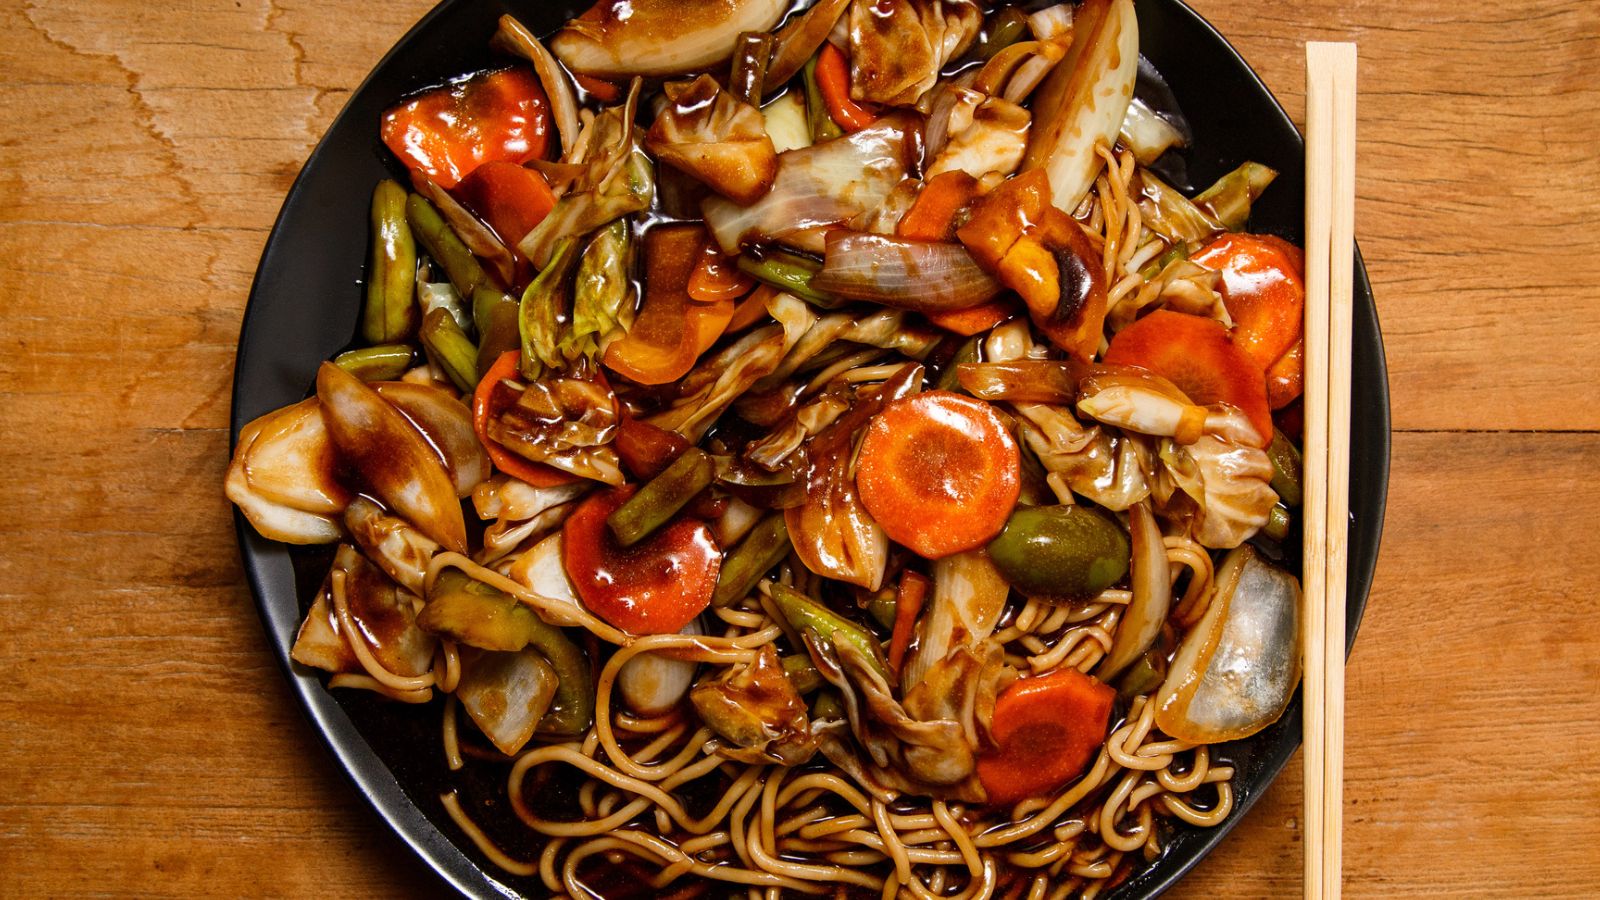 Stir Up Culinary Magic with these 18 Scrumptious Wok Recipes